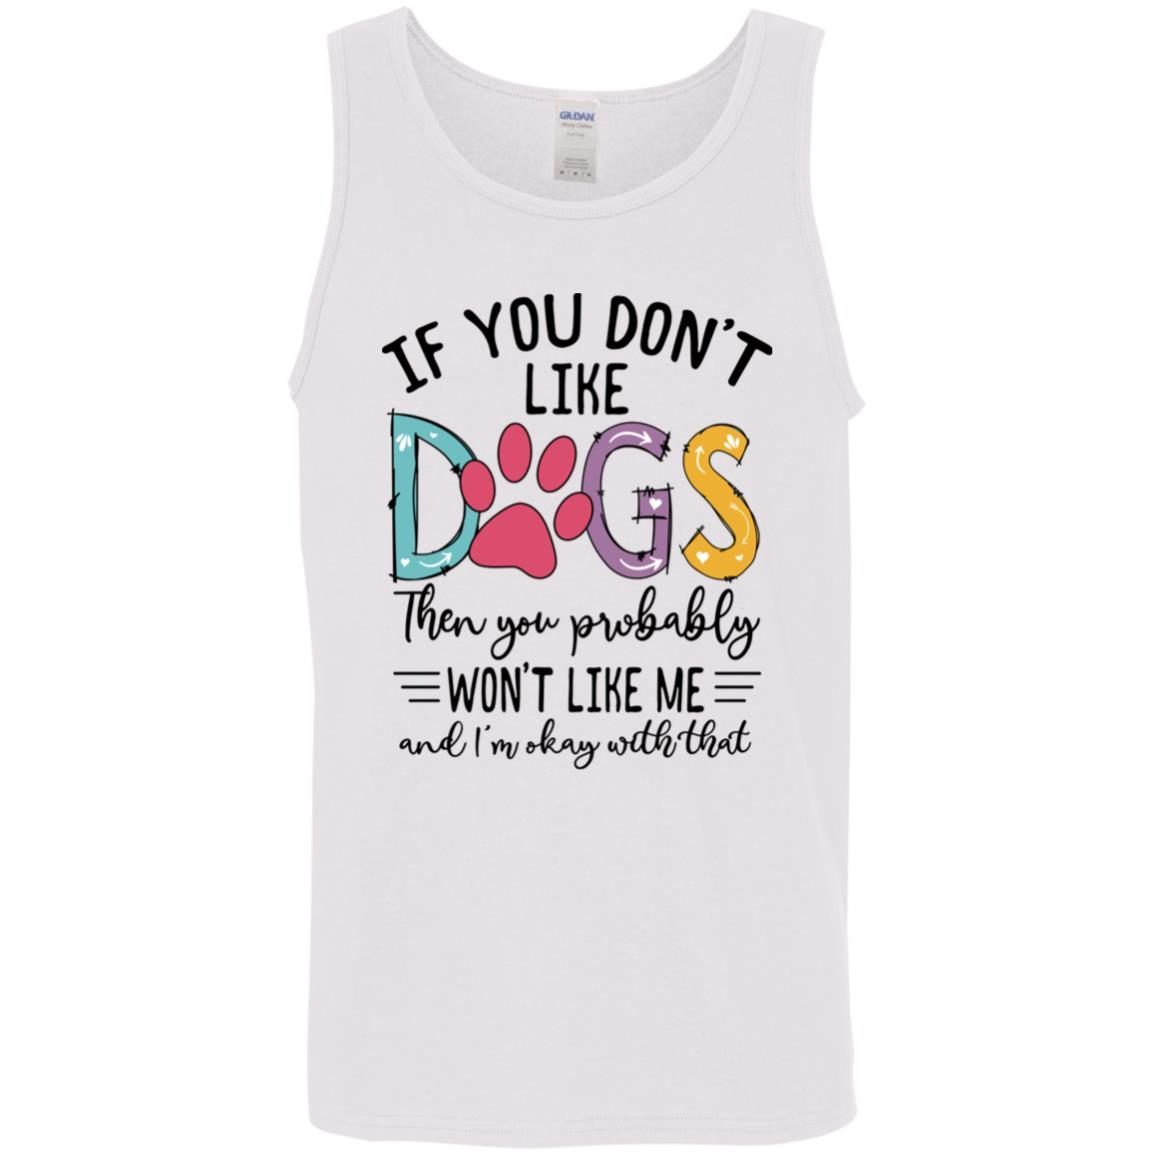 If You Don’t Like Dogs Then You Probably Won’t Like Me shirt 6